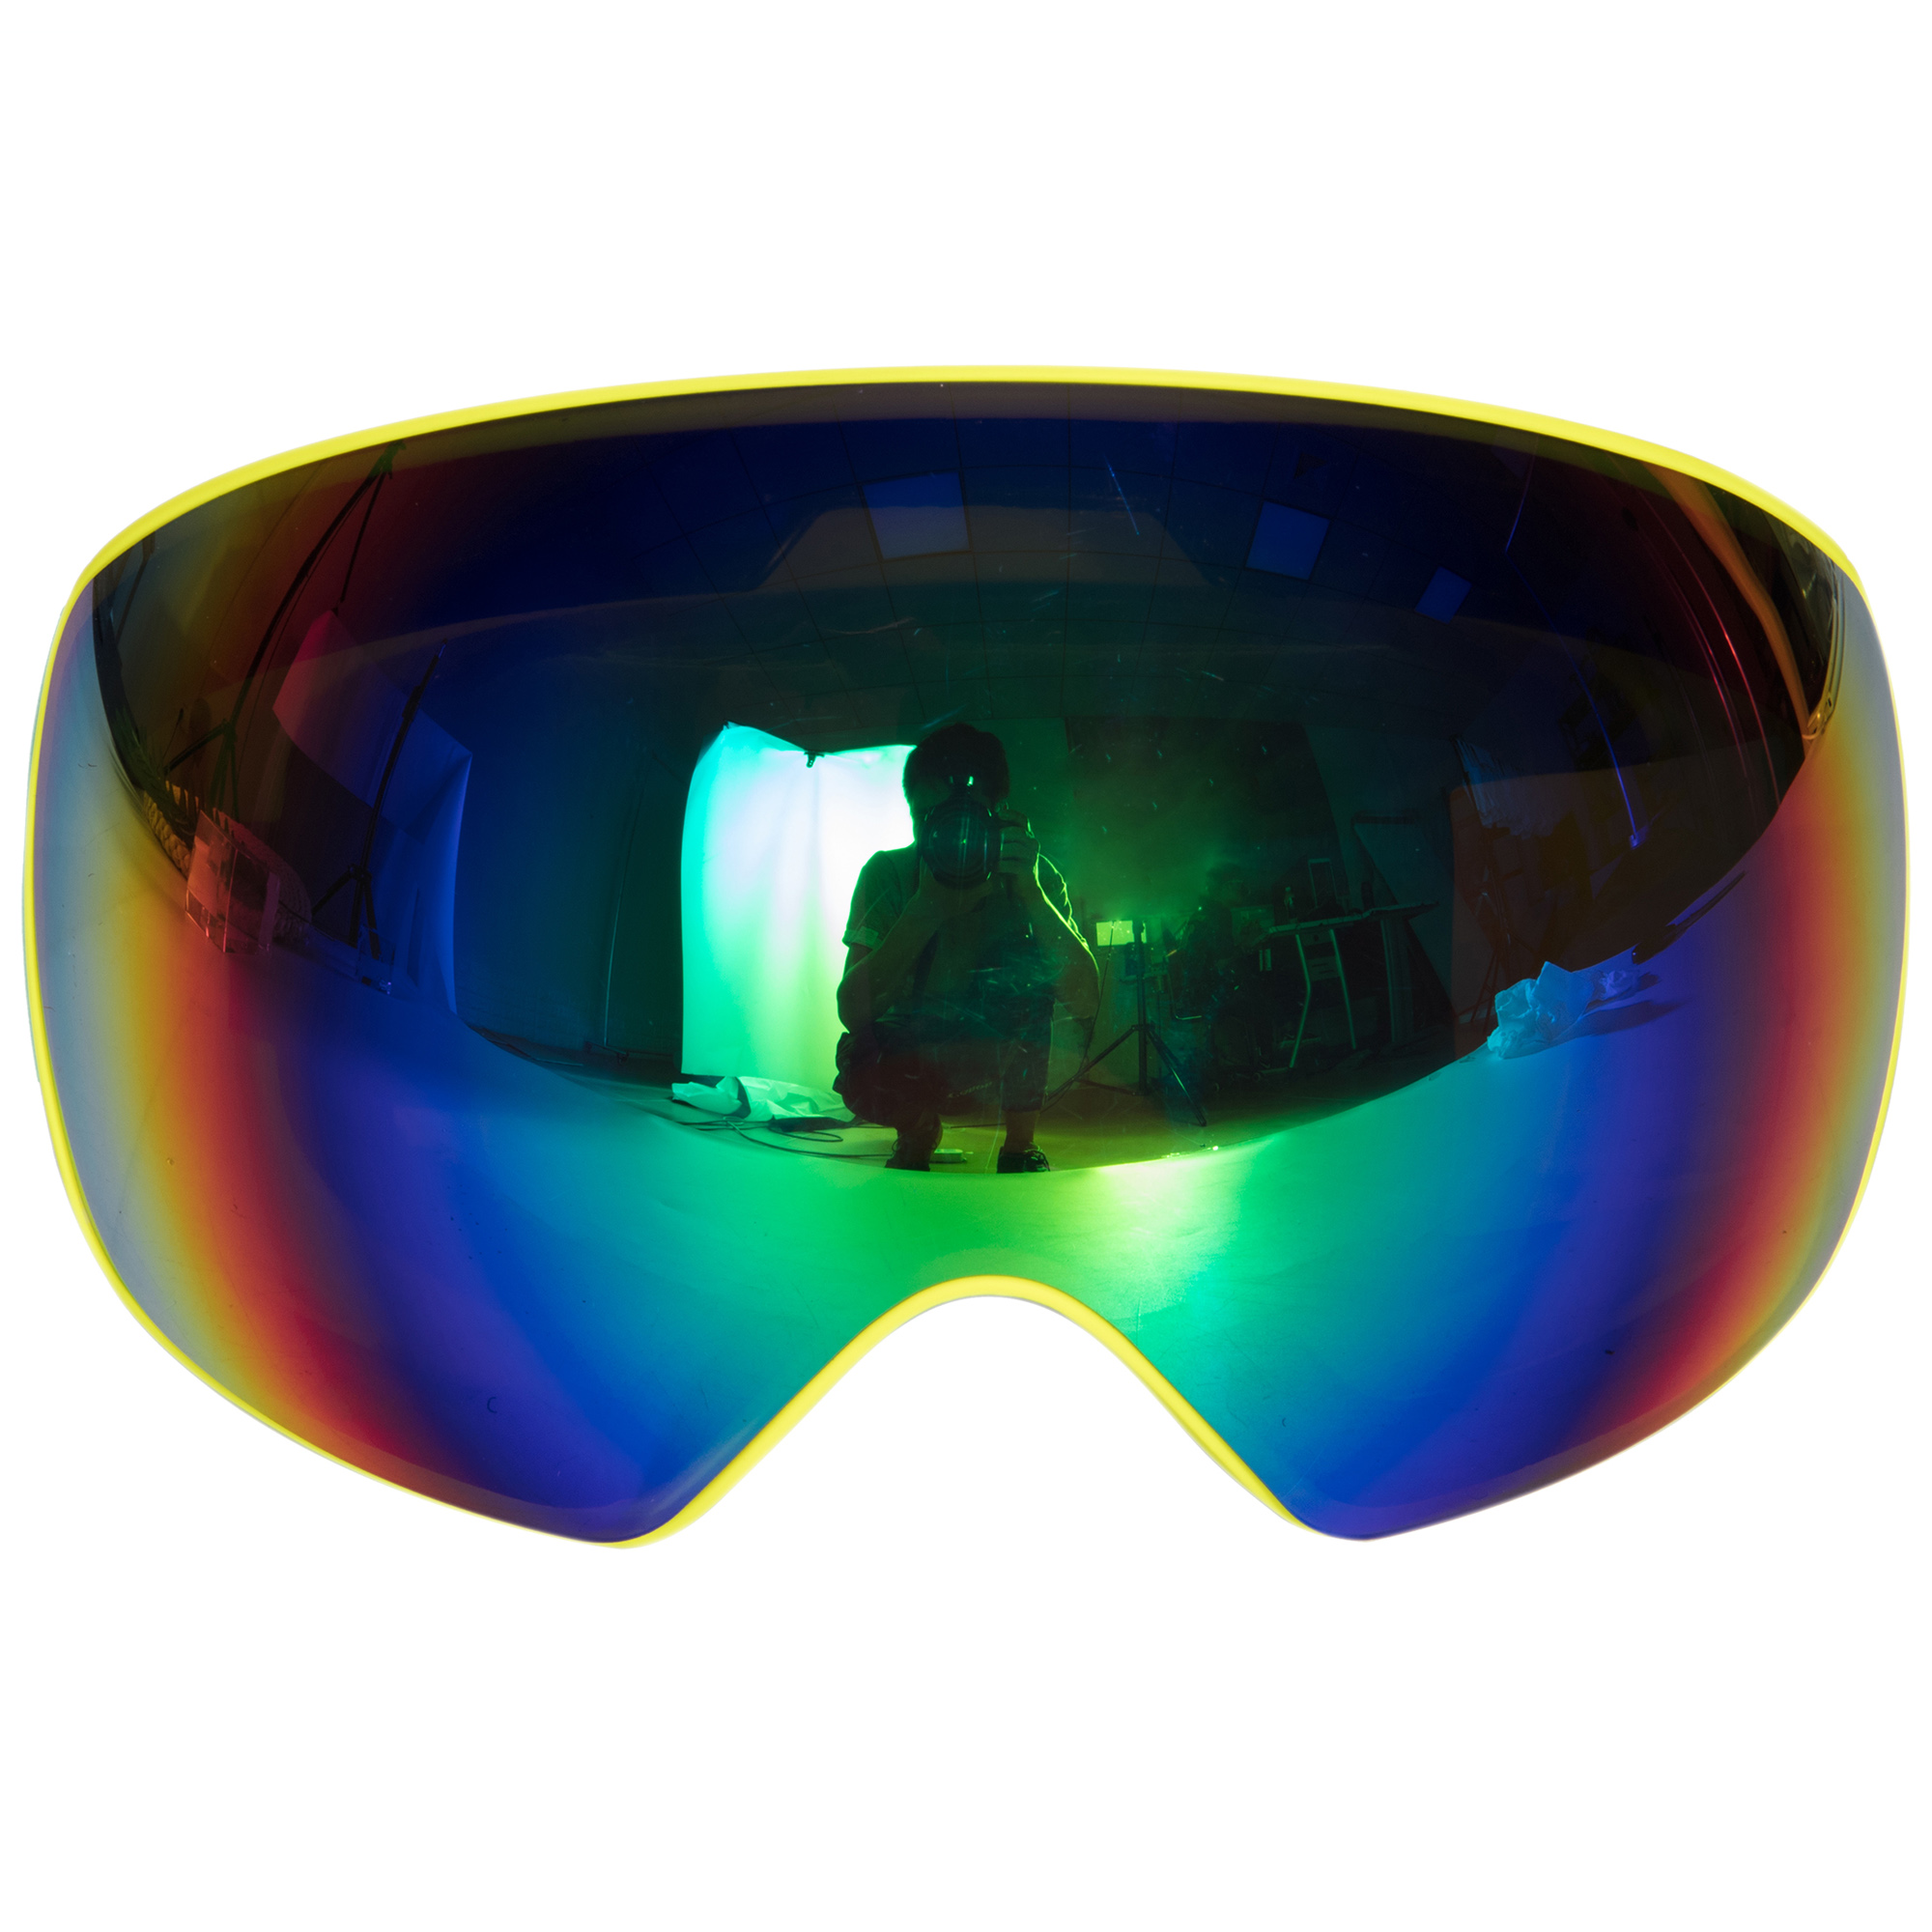 SAYFUT Ski Snowboarding Goggles, Anti-Fog Layer Lens Snow Goggles UV400 Protection for Men Women Youth Snowmobile Skiing Skating - image 1 of 8